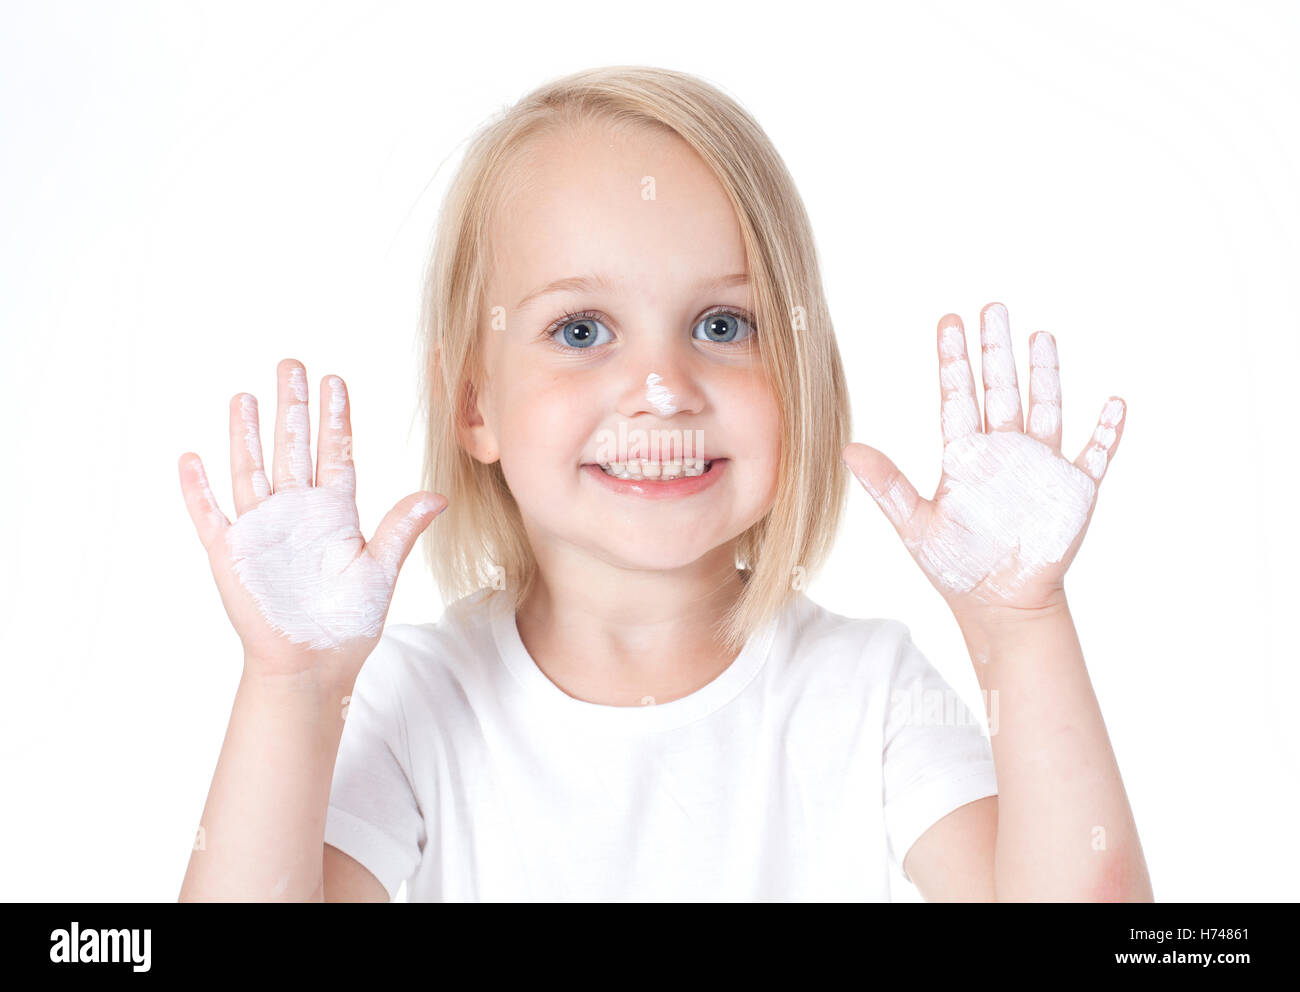 Child with painted hands on a white background Stock Photo